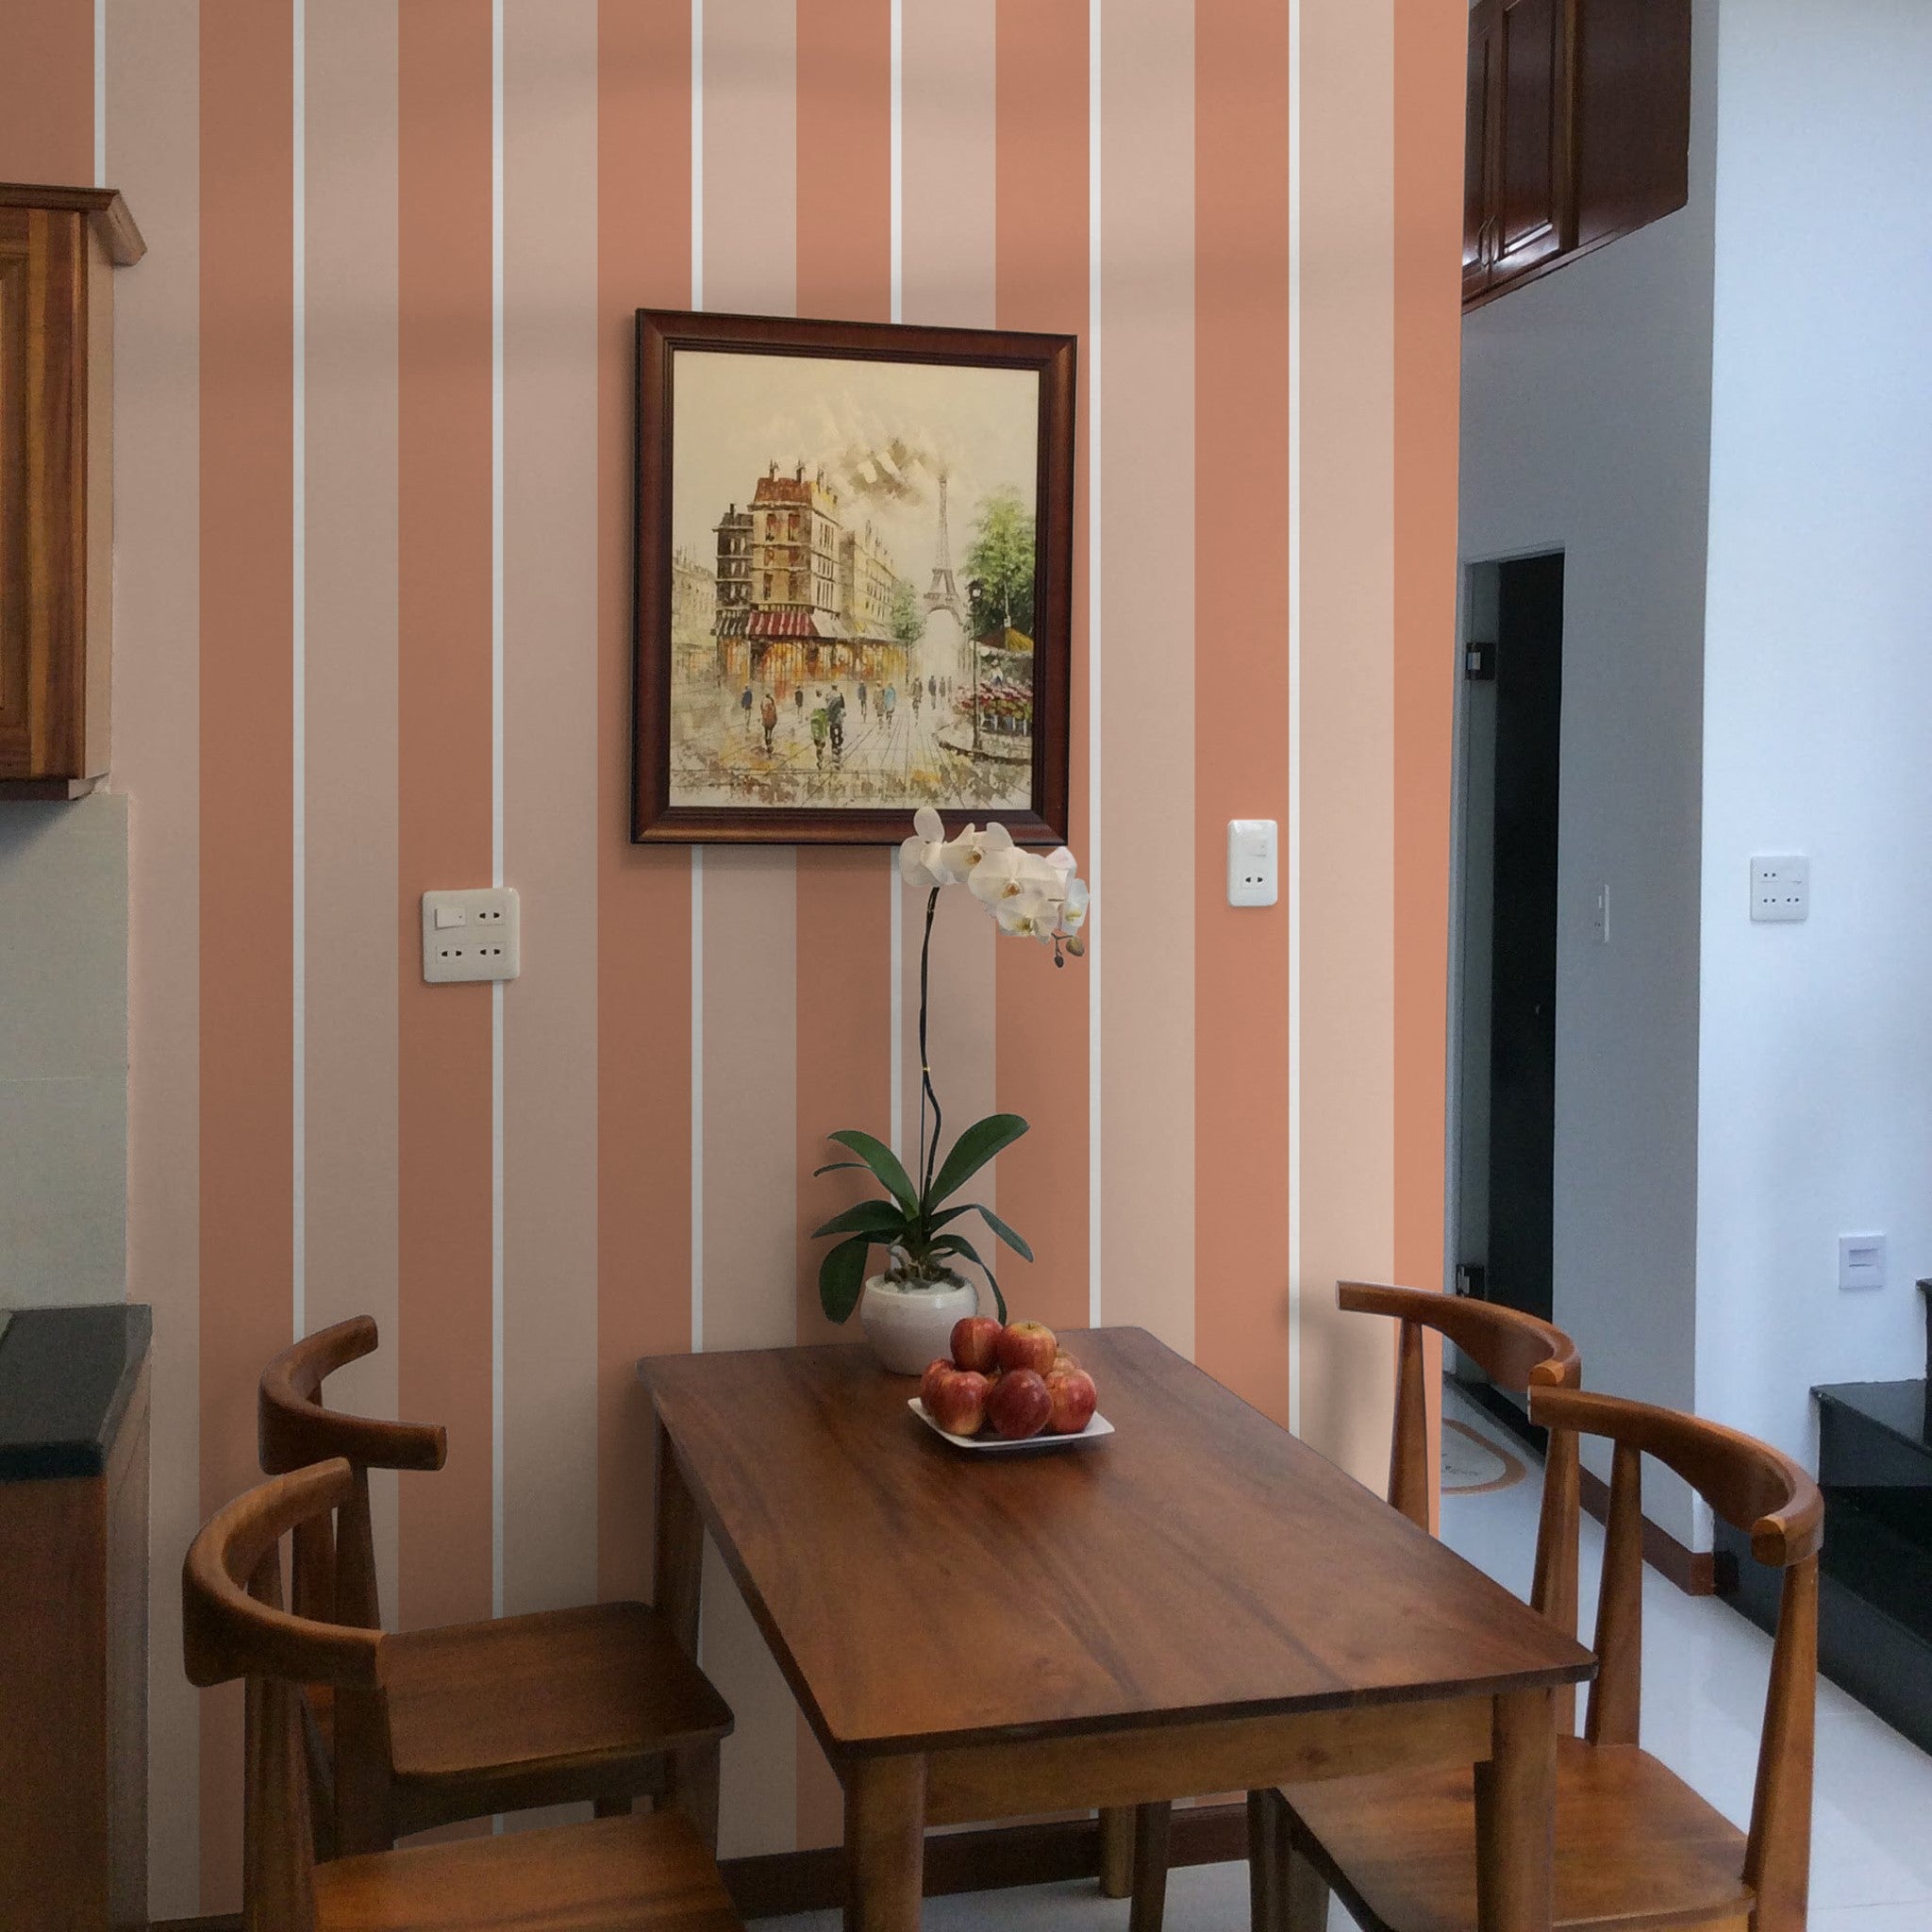 "Wall Blush's Life's A Peach Wallpaper in modern dining room with wooden furniture and decor accents."